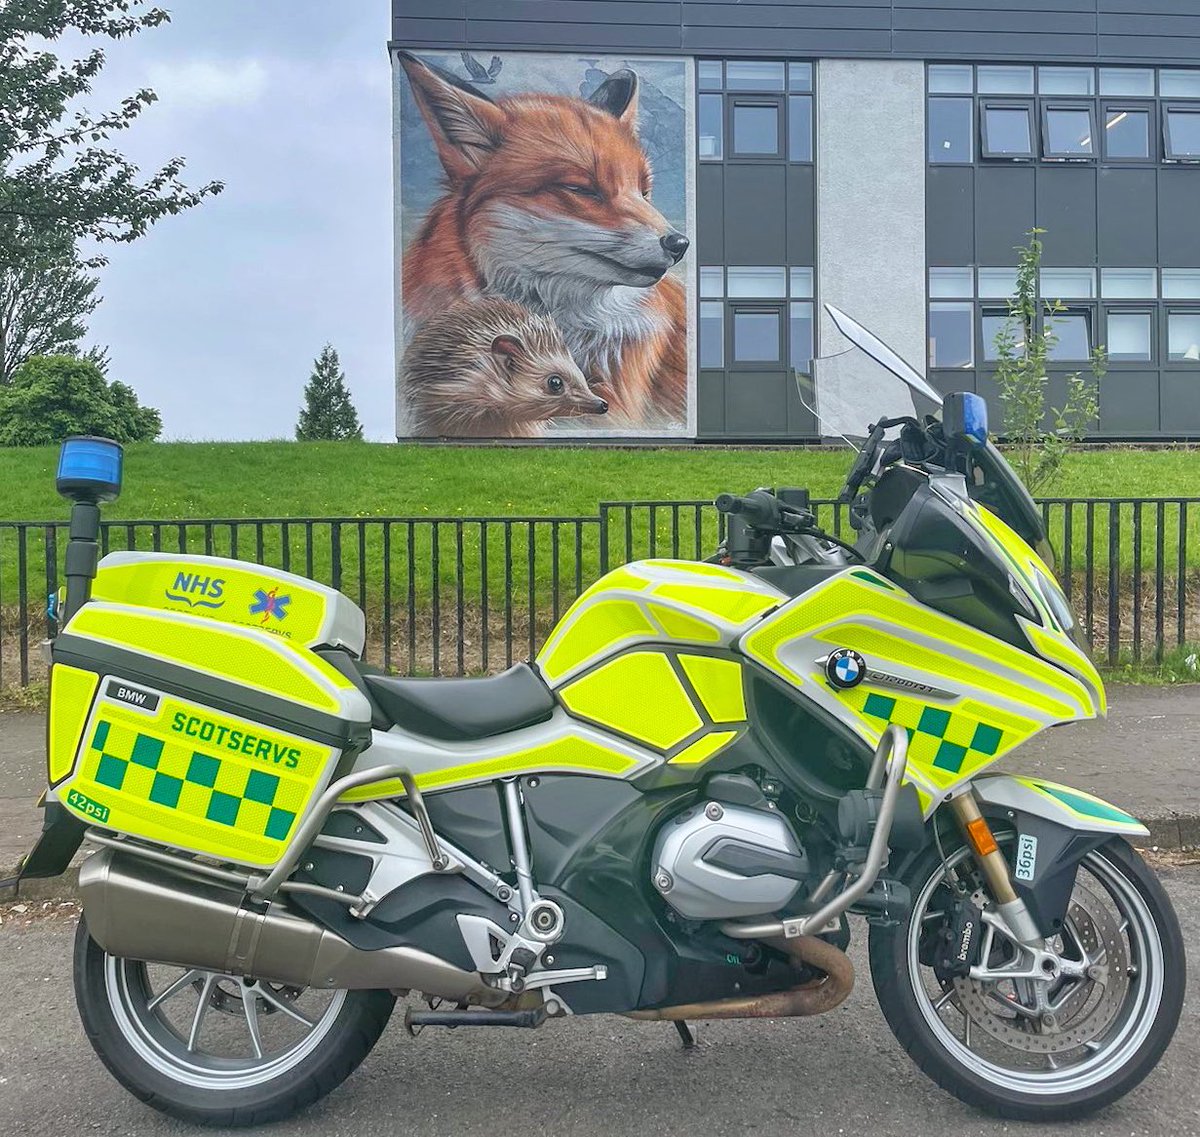 #Glasgow has a proud history of gorgeous #StreetArt

Saying goes “The fox knows many things, but the hedgehog knows one big thing'

So #fox or #hedgehog? 
#scotservs #Charity #NHSScot75
#NHSVolunteers #glasgowgraffiti #Volunteer #Ambulance
#Motorcycle #qeuh
Credit #SMUG #smugone